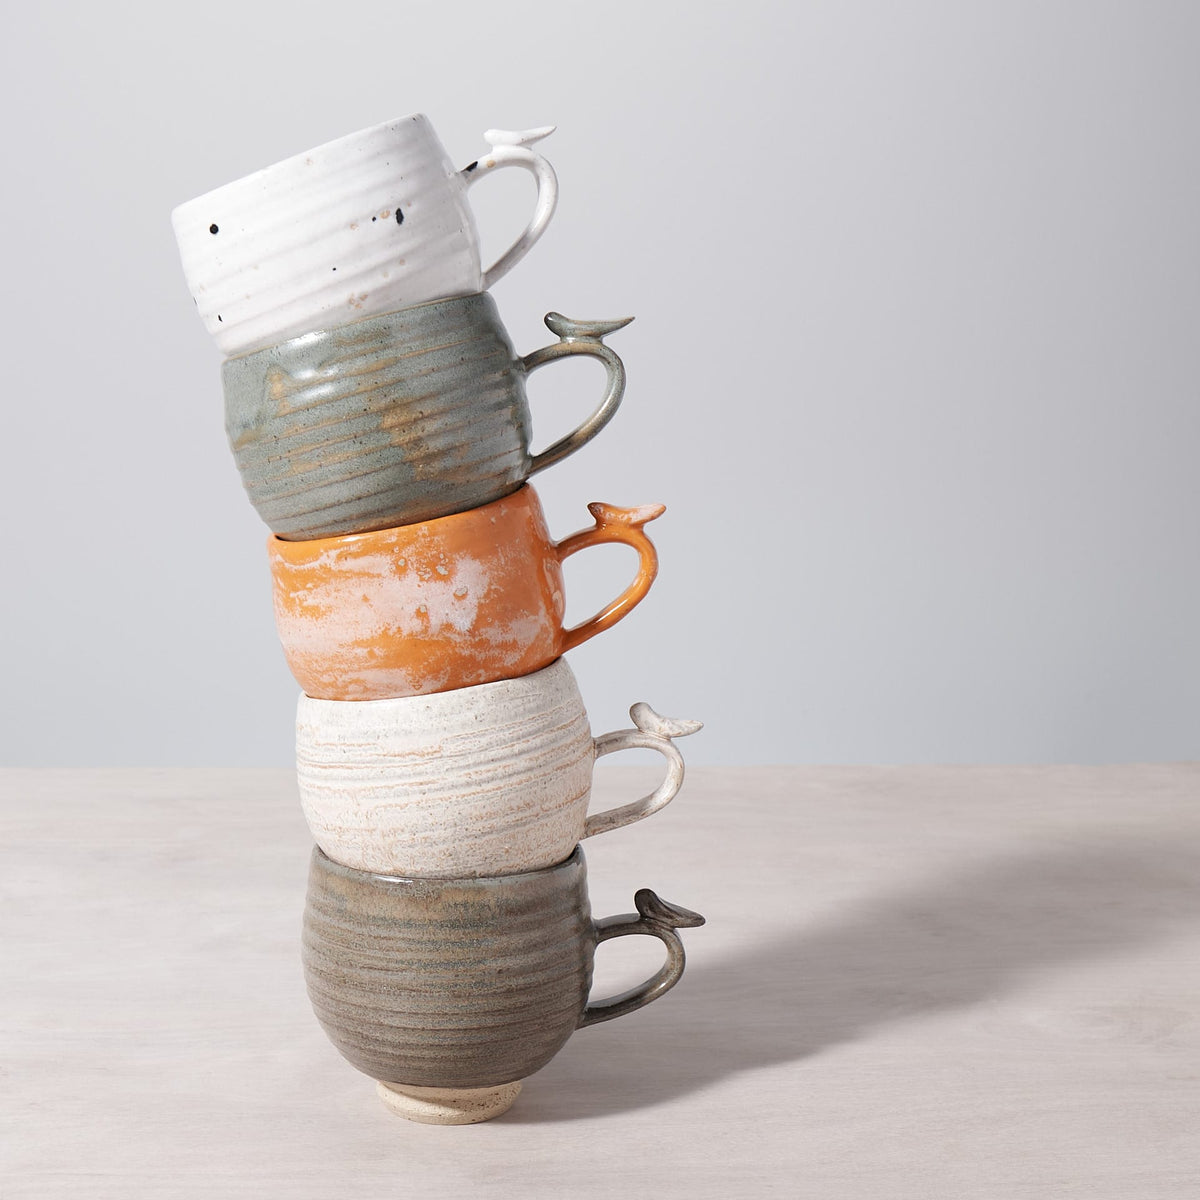 A stack of Bird Handle Cup - Green Tea mugs stacked on top of each other from Jino Ceramic Studio.